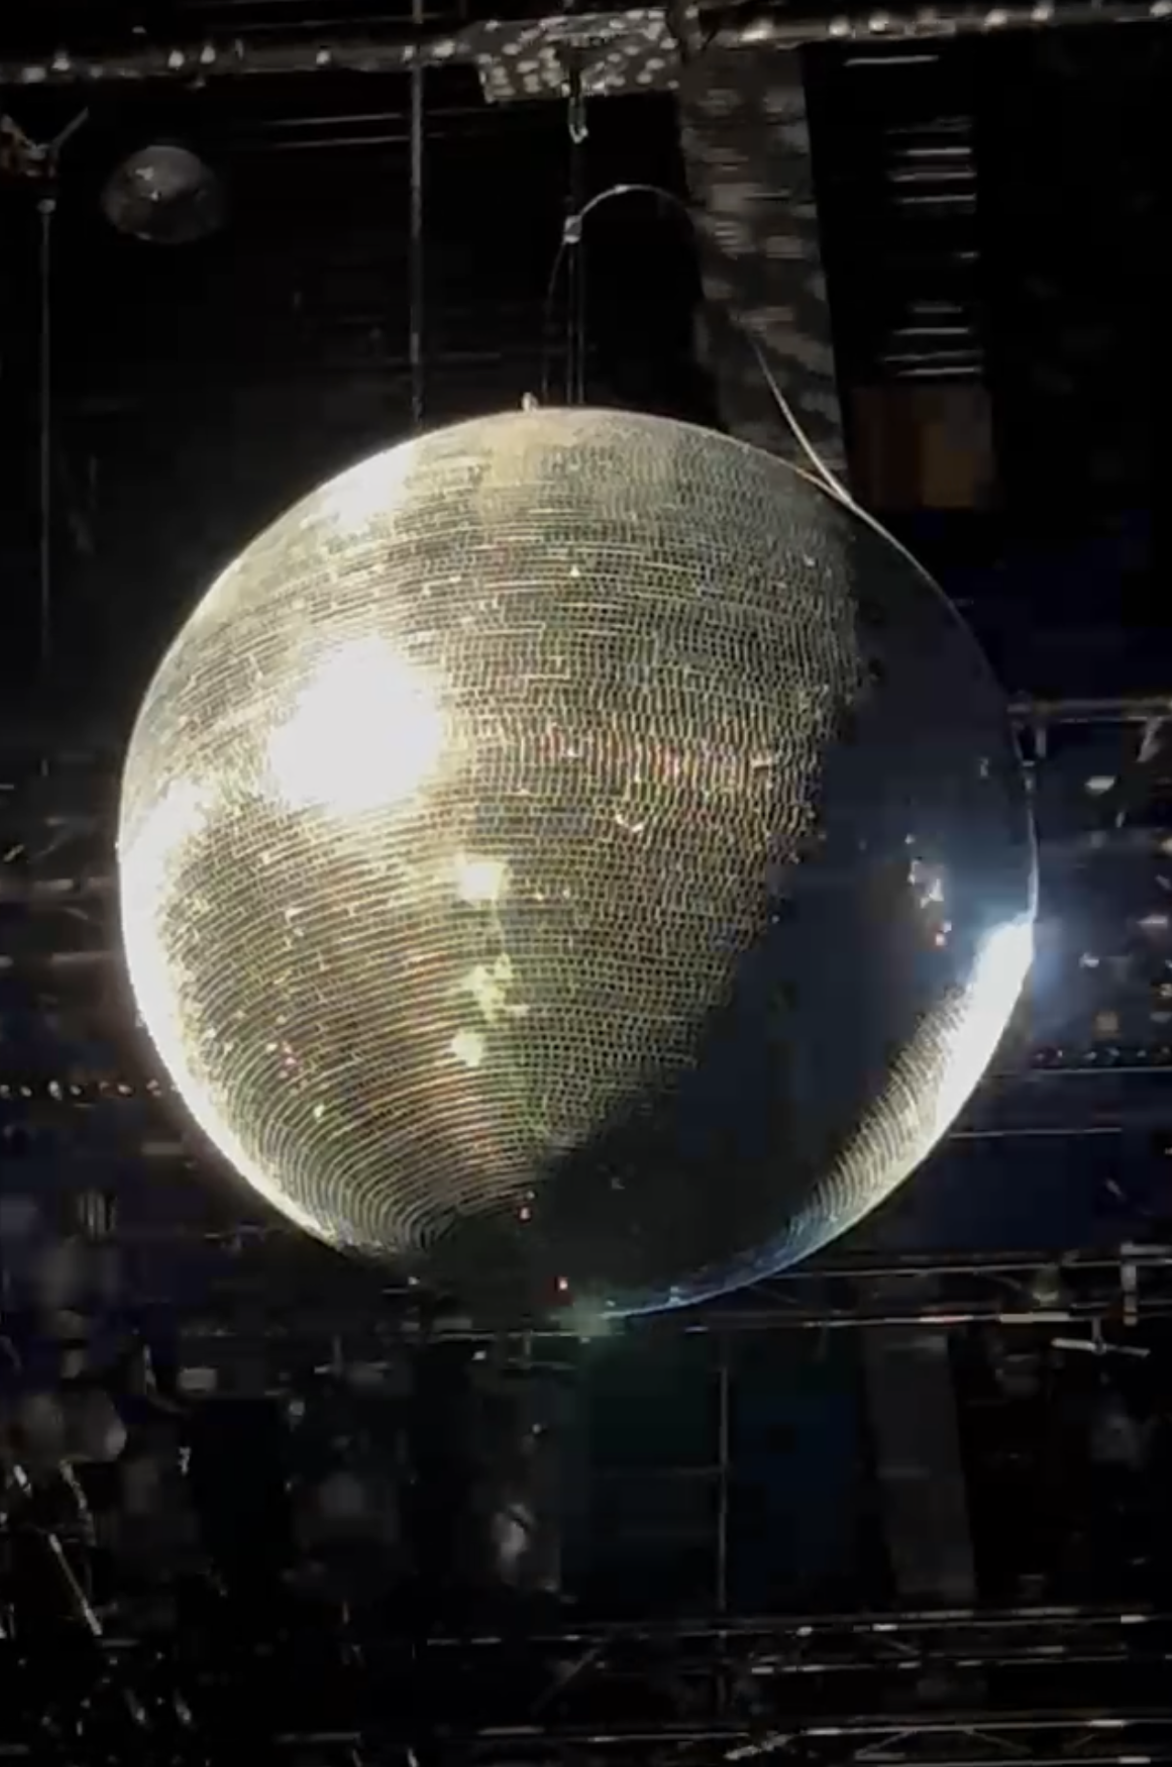 The fun and sparkly disco ball setting the perfect mood at the Rotate show